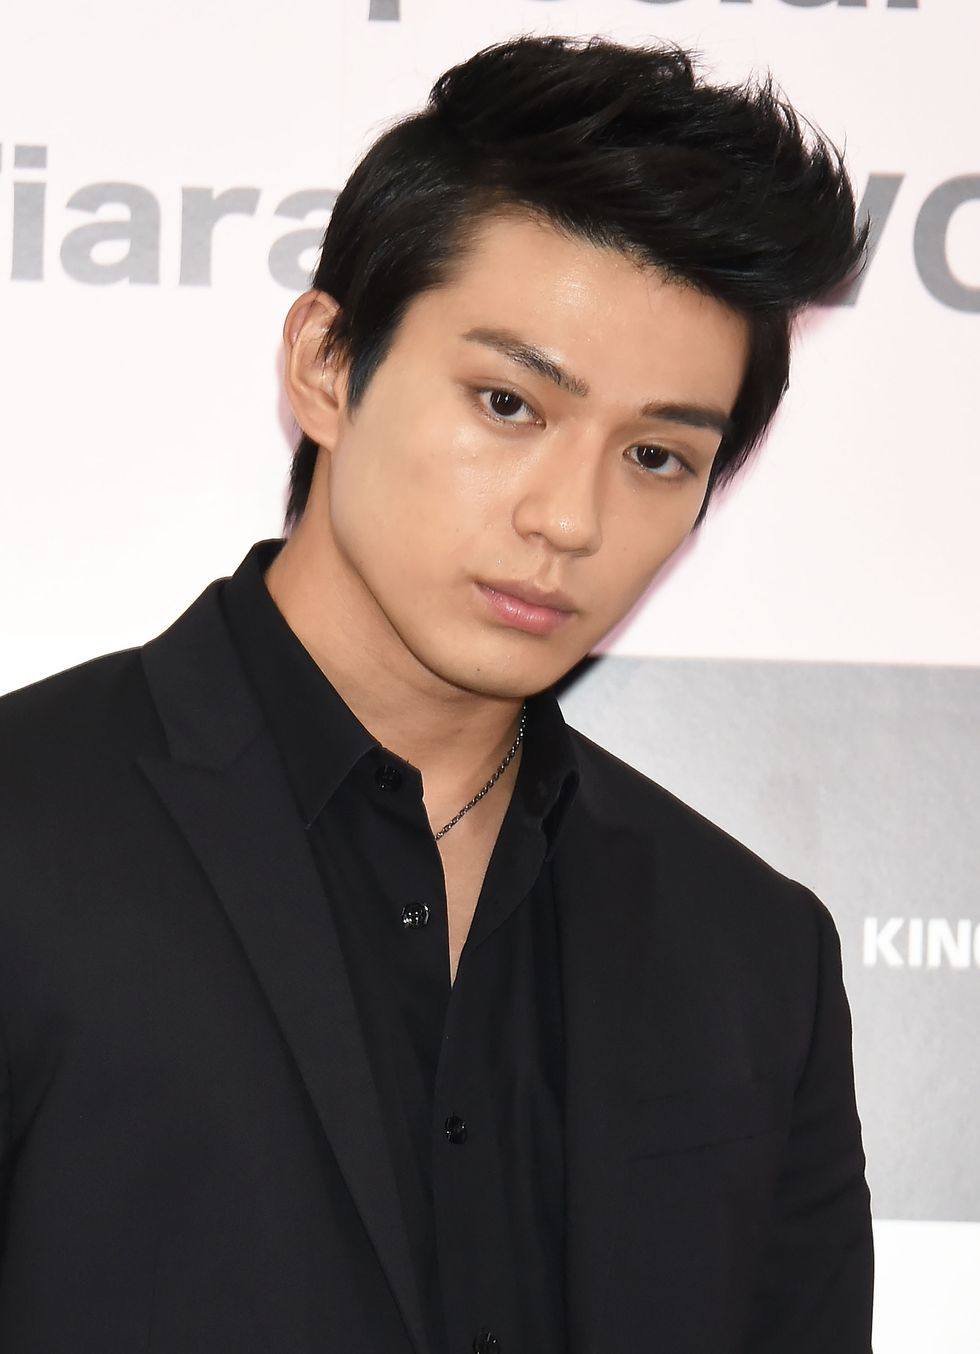 tokyo, japan   october 18  actor mackenyu arata attends the samantha thavasas christmas tv commercial launch press event on october 18, 2017 in tokyo, japan  photo by jun satowireimage